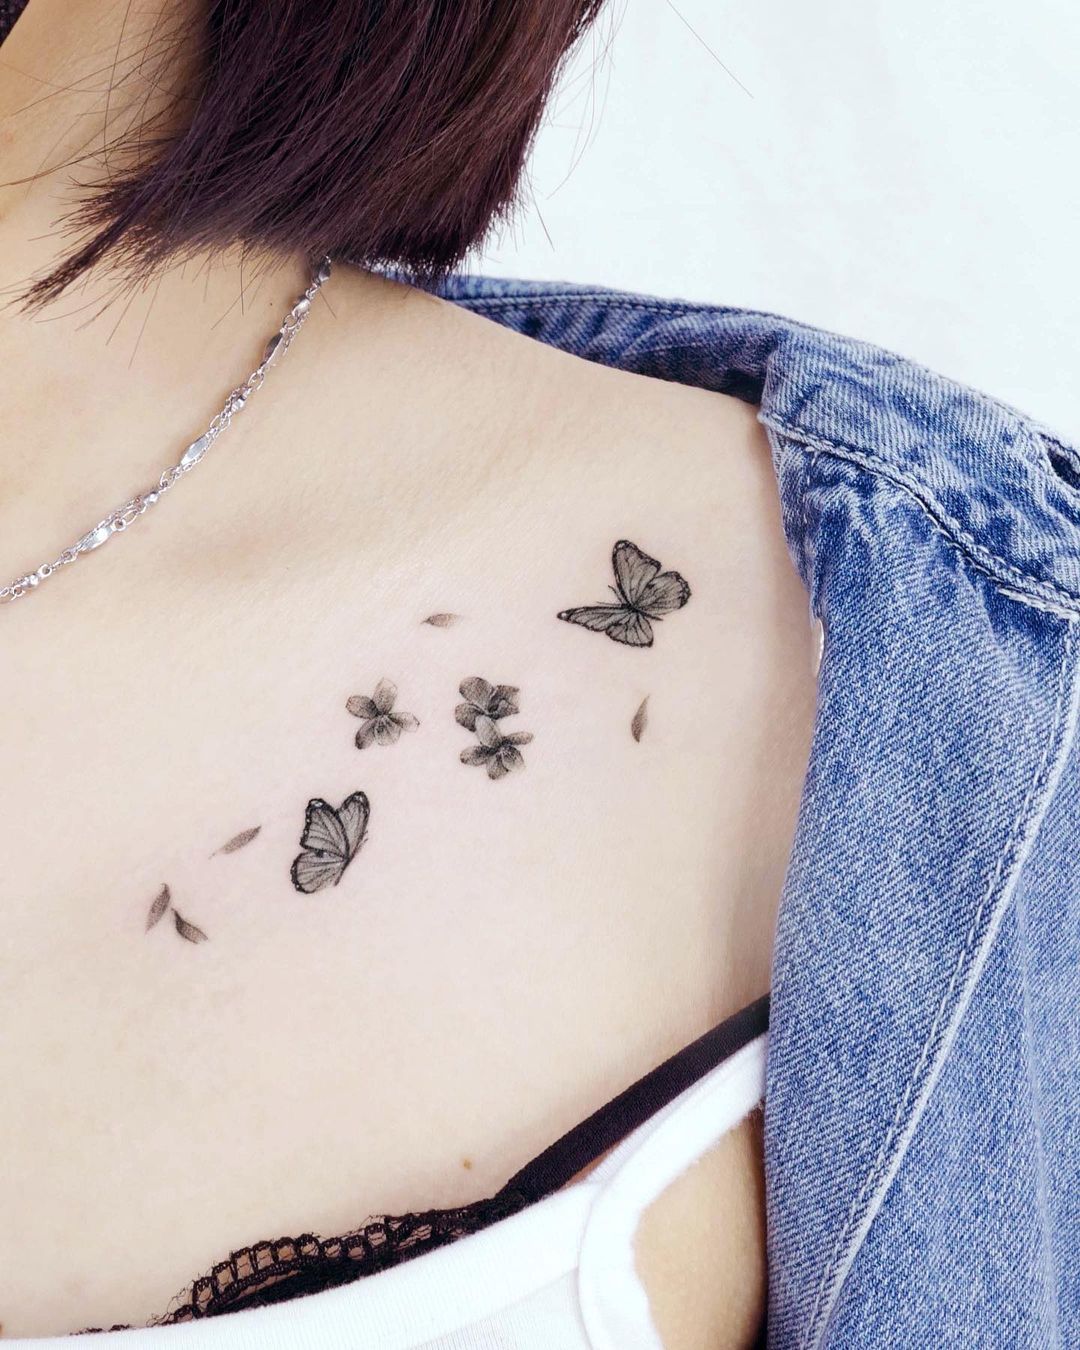 Butterfly Tattoo Meaning